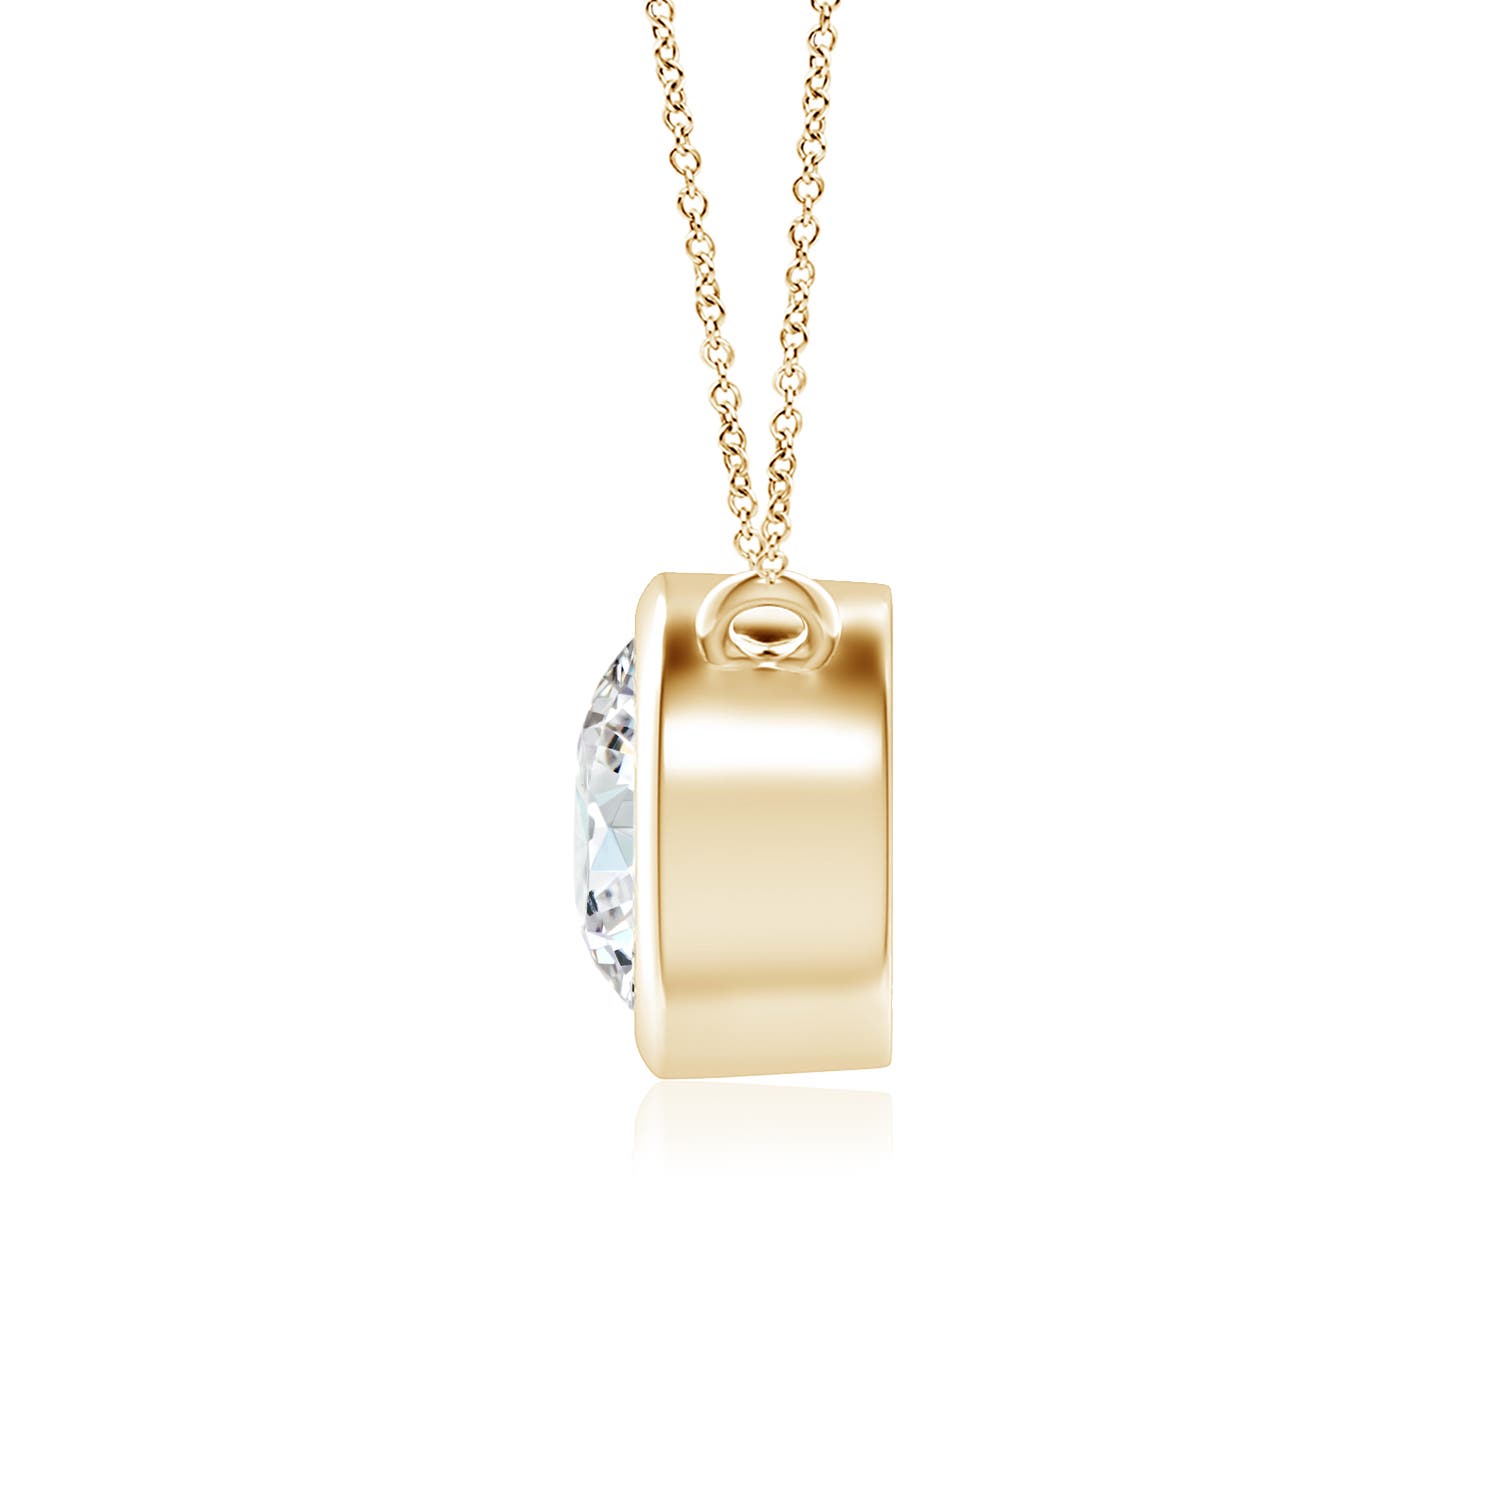 GVS2 / 0.5 CT / 14 KT Yellow Gold